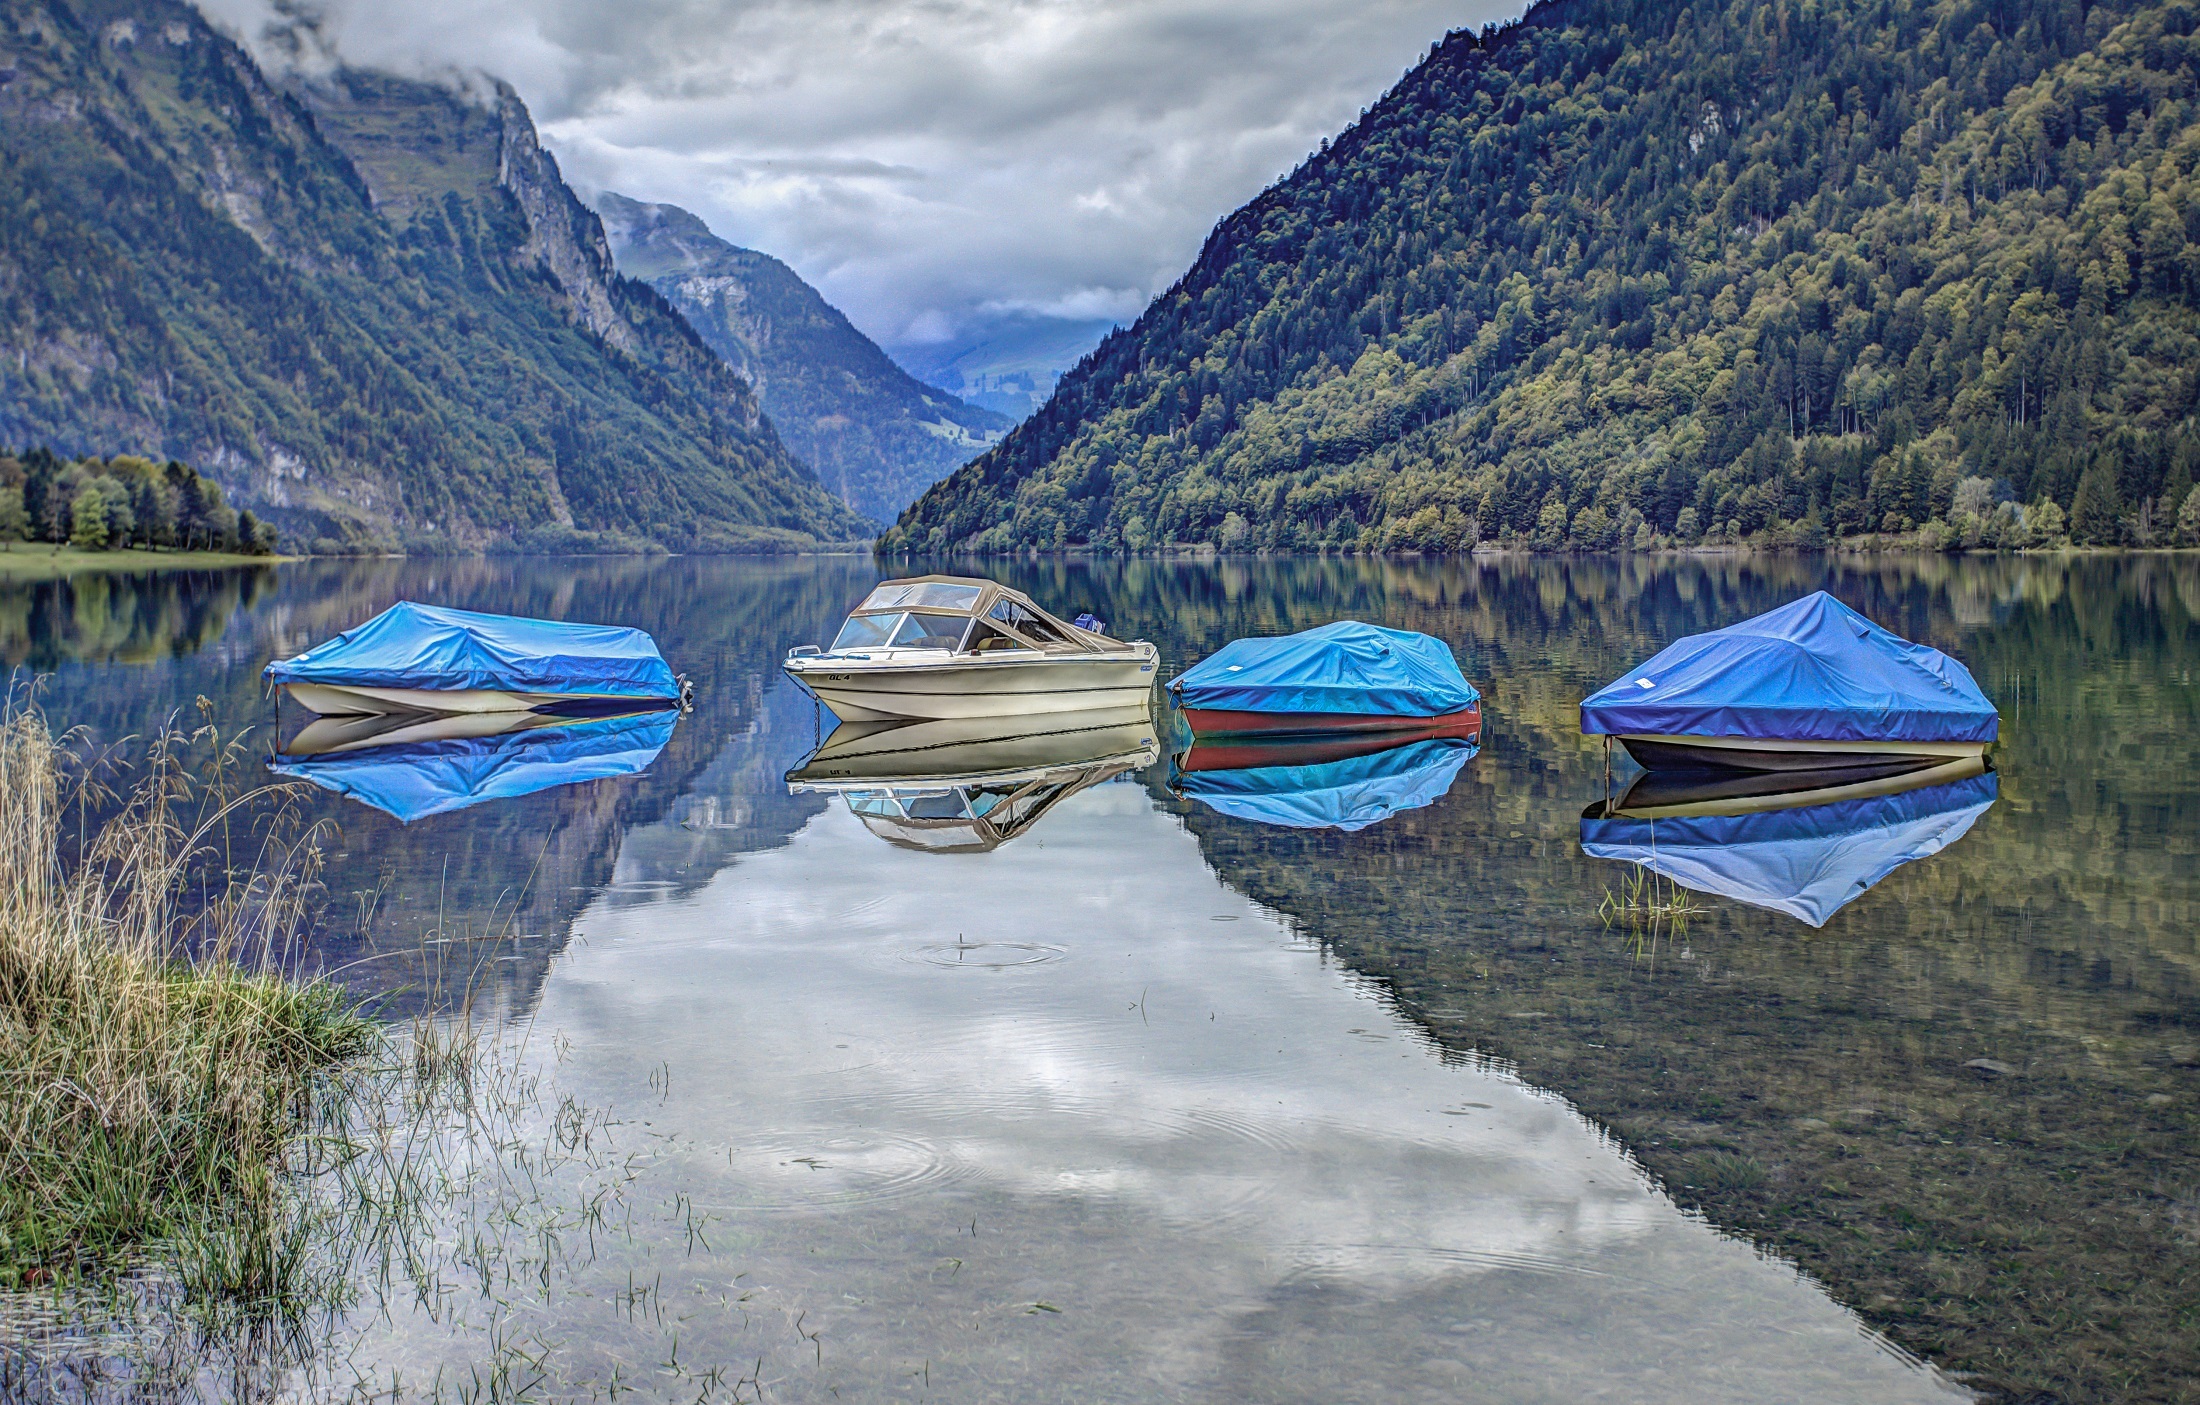 Boats in the lake photo